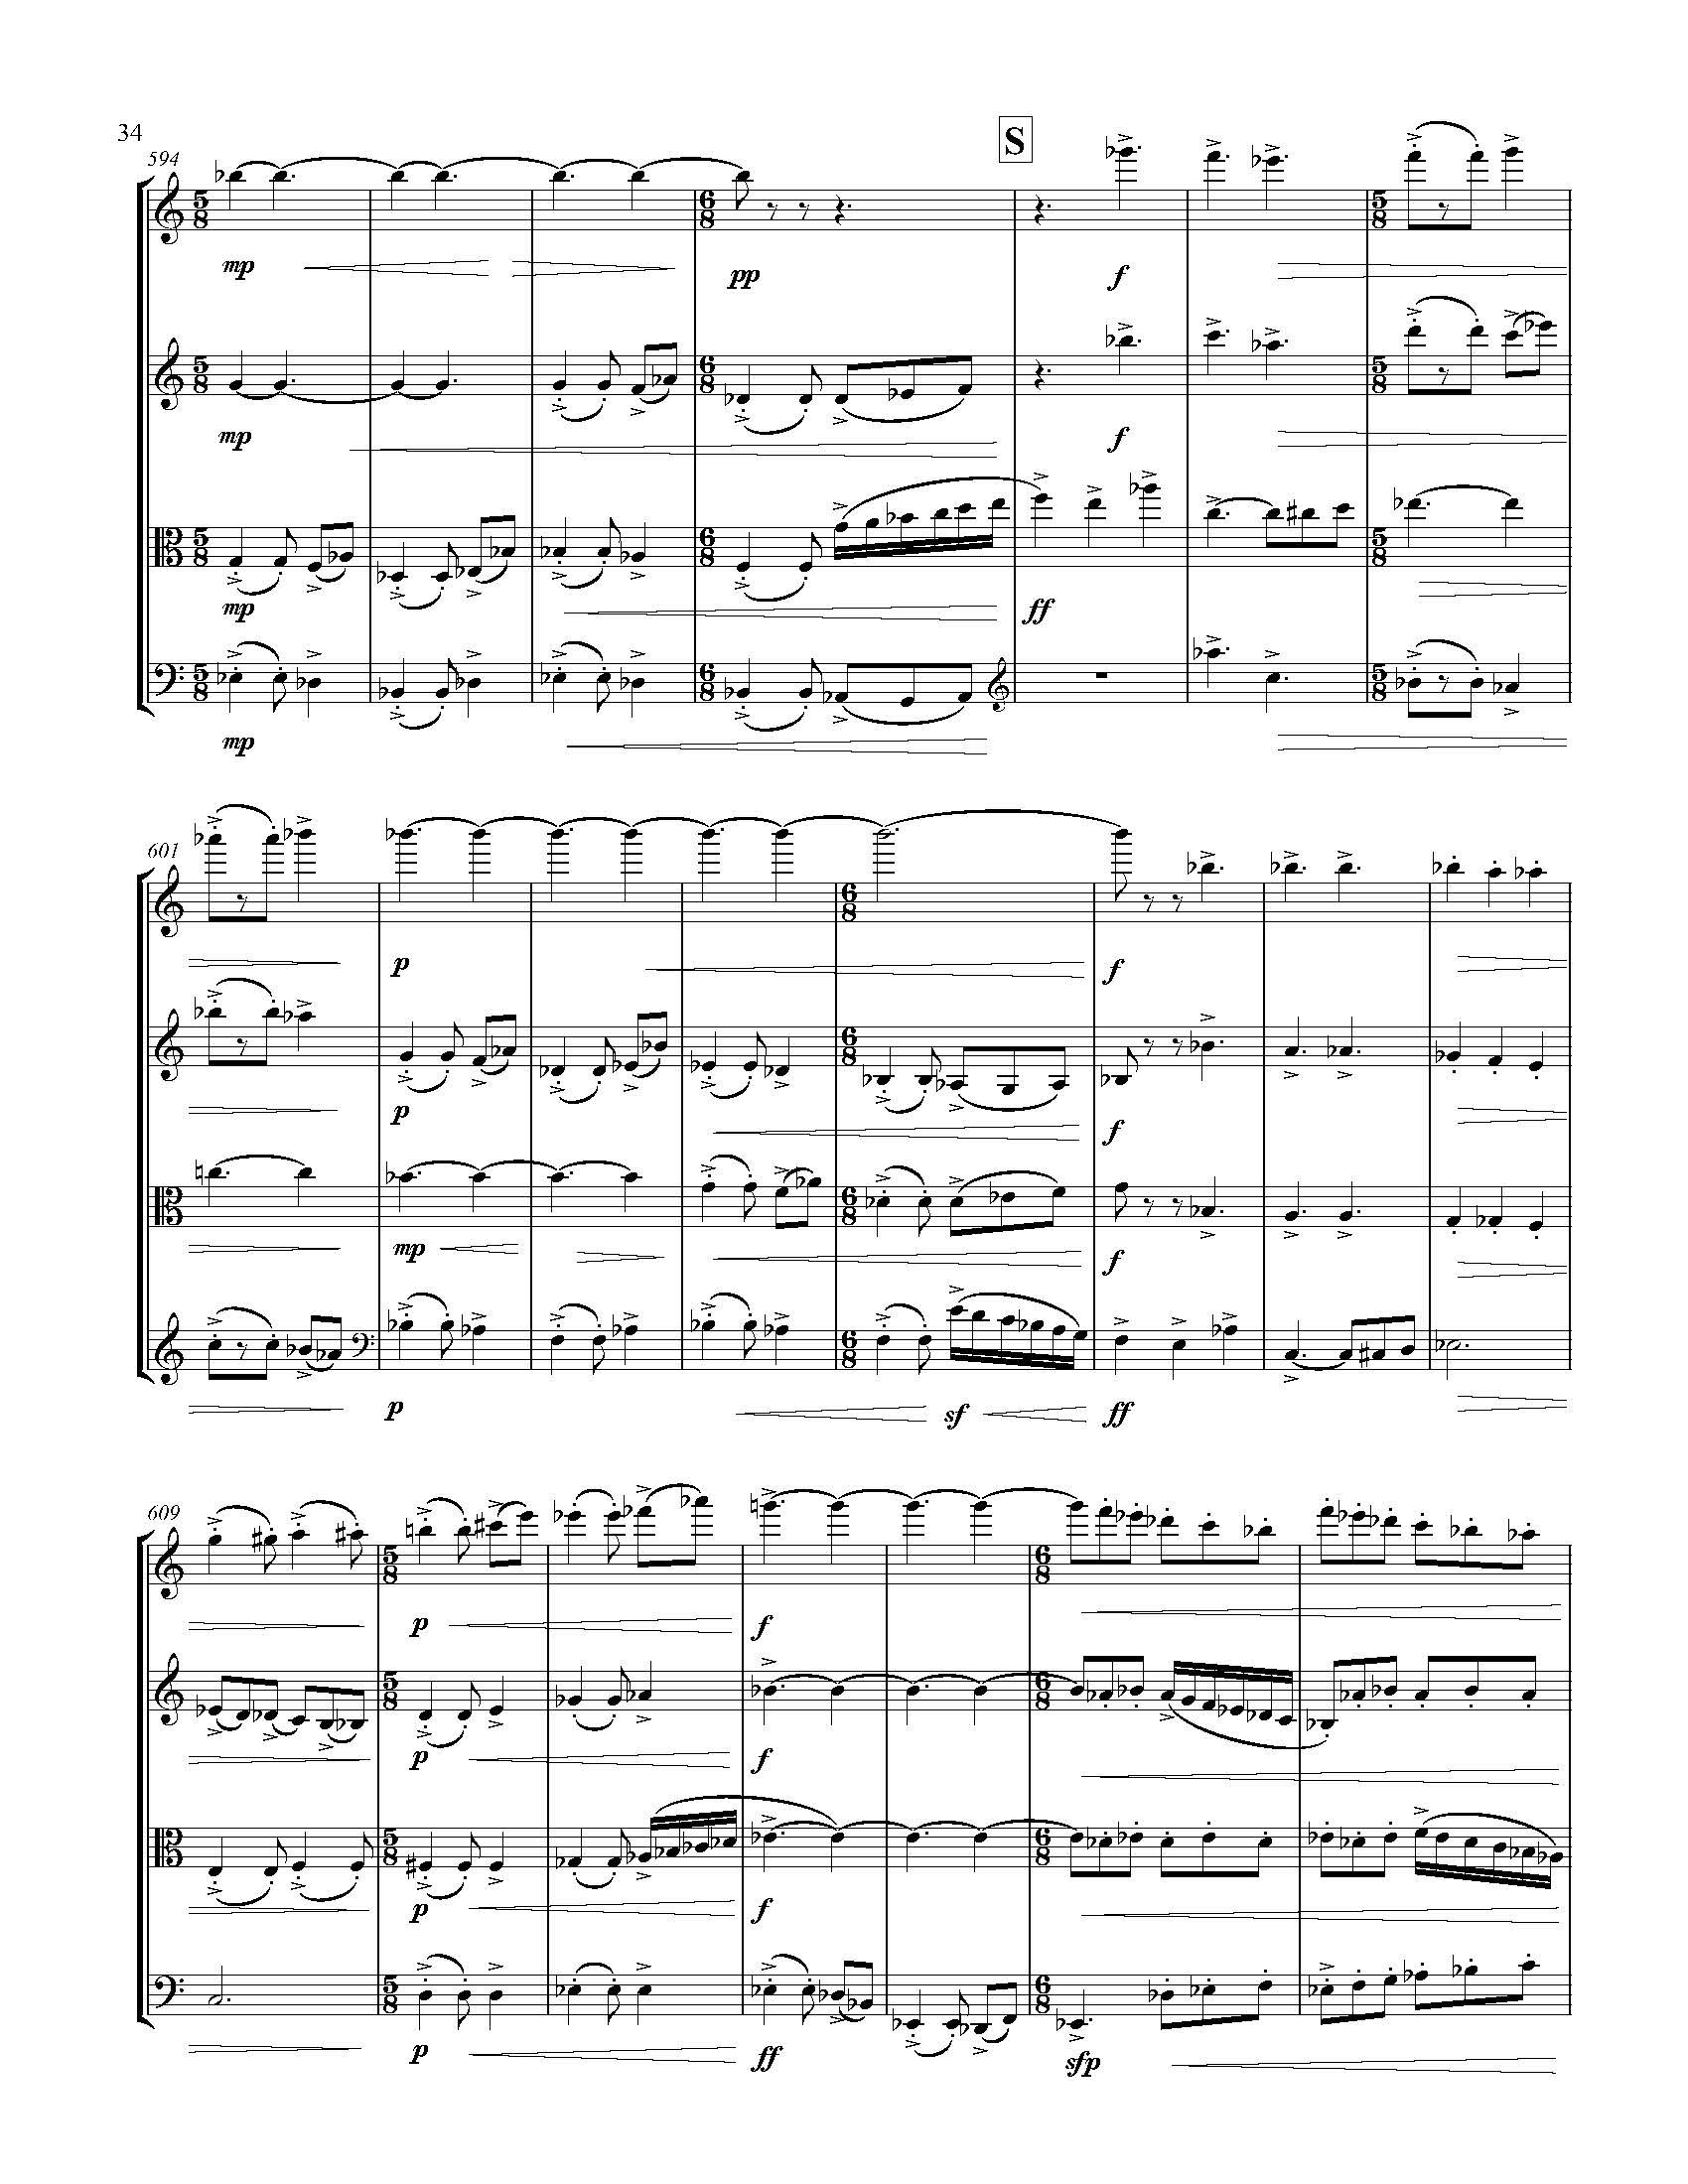 A Country of Vast Designs - Complete Score_Page_40.jpg